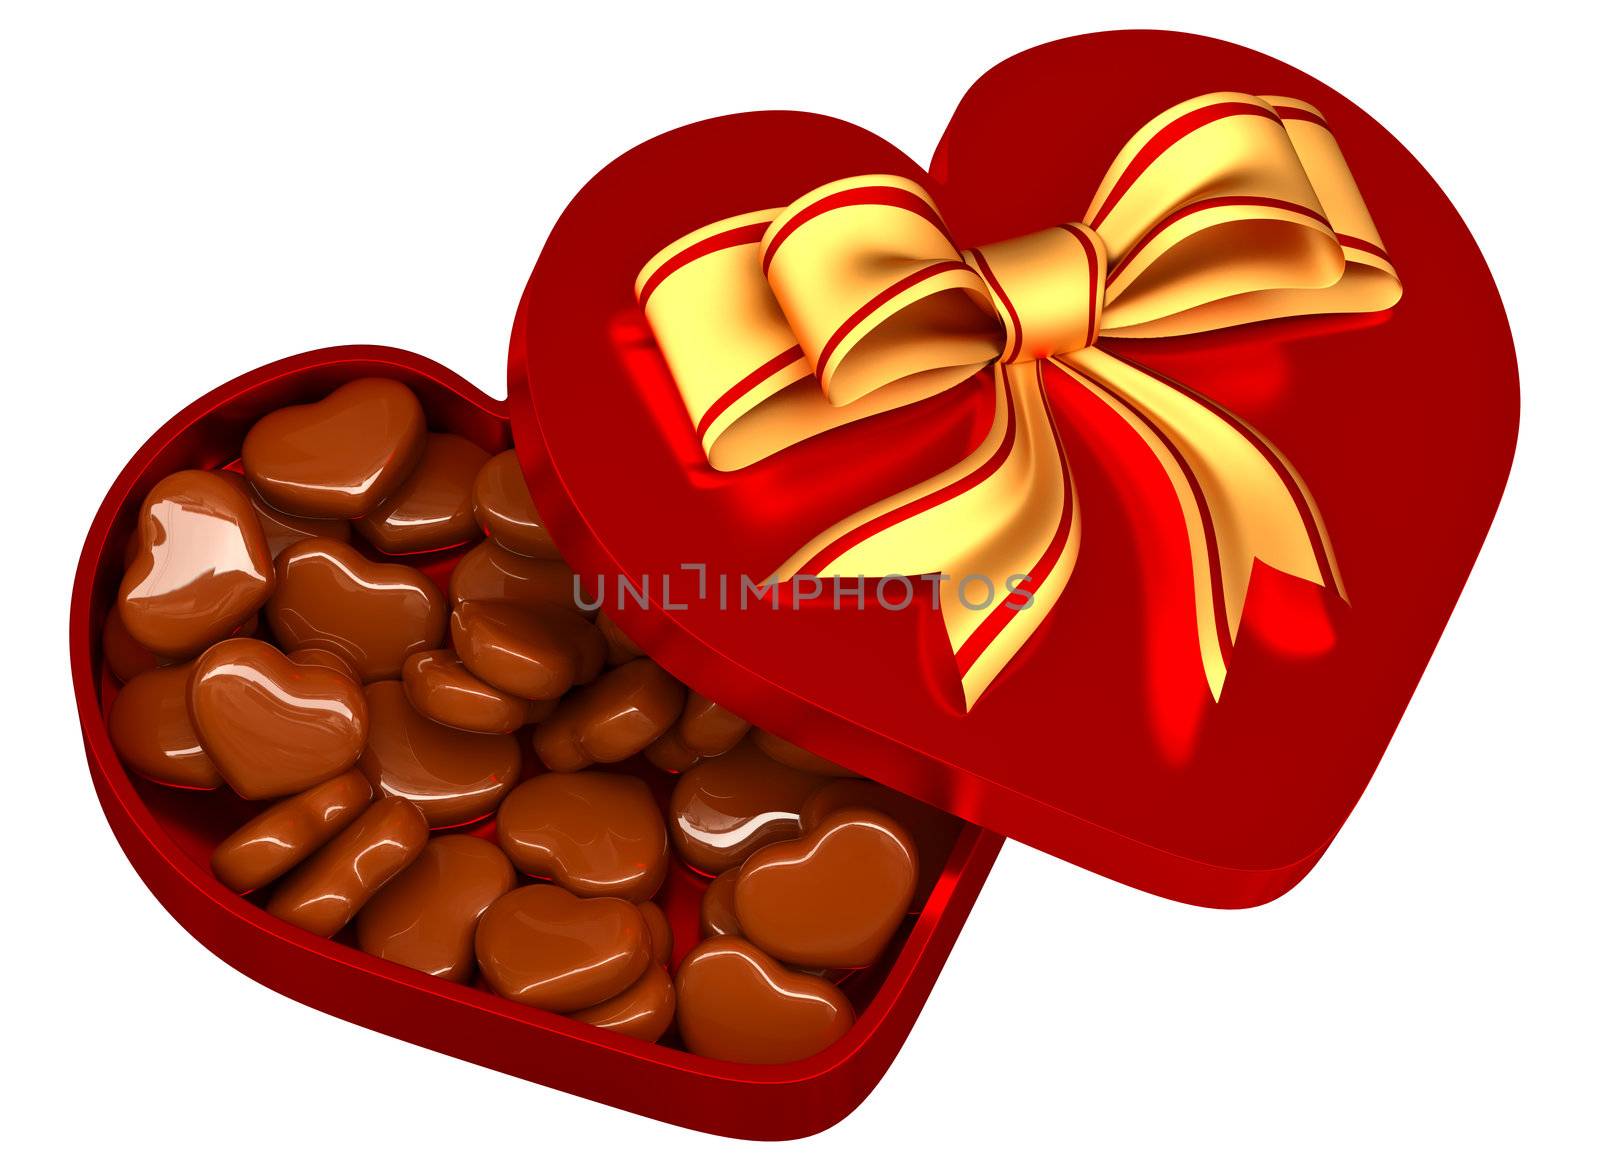 chocolate in a box as a gift for Valentine's Day by merzavka